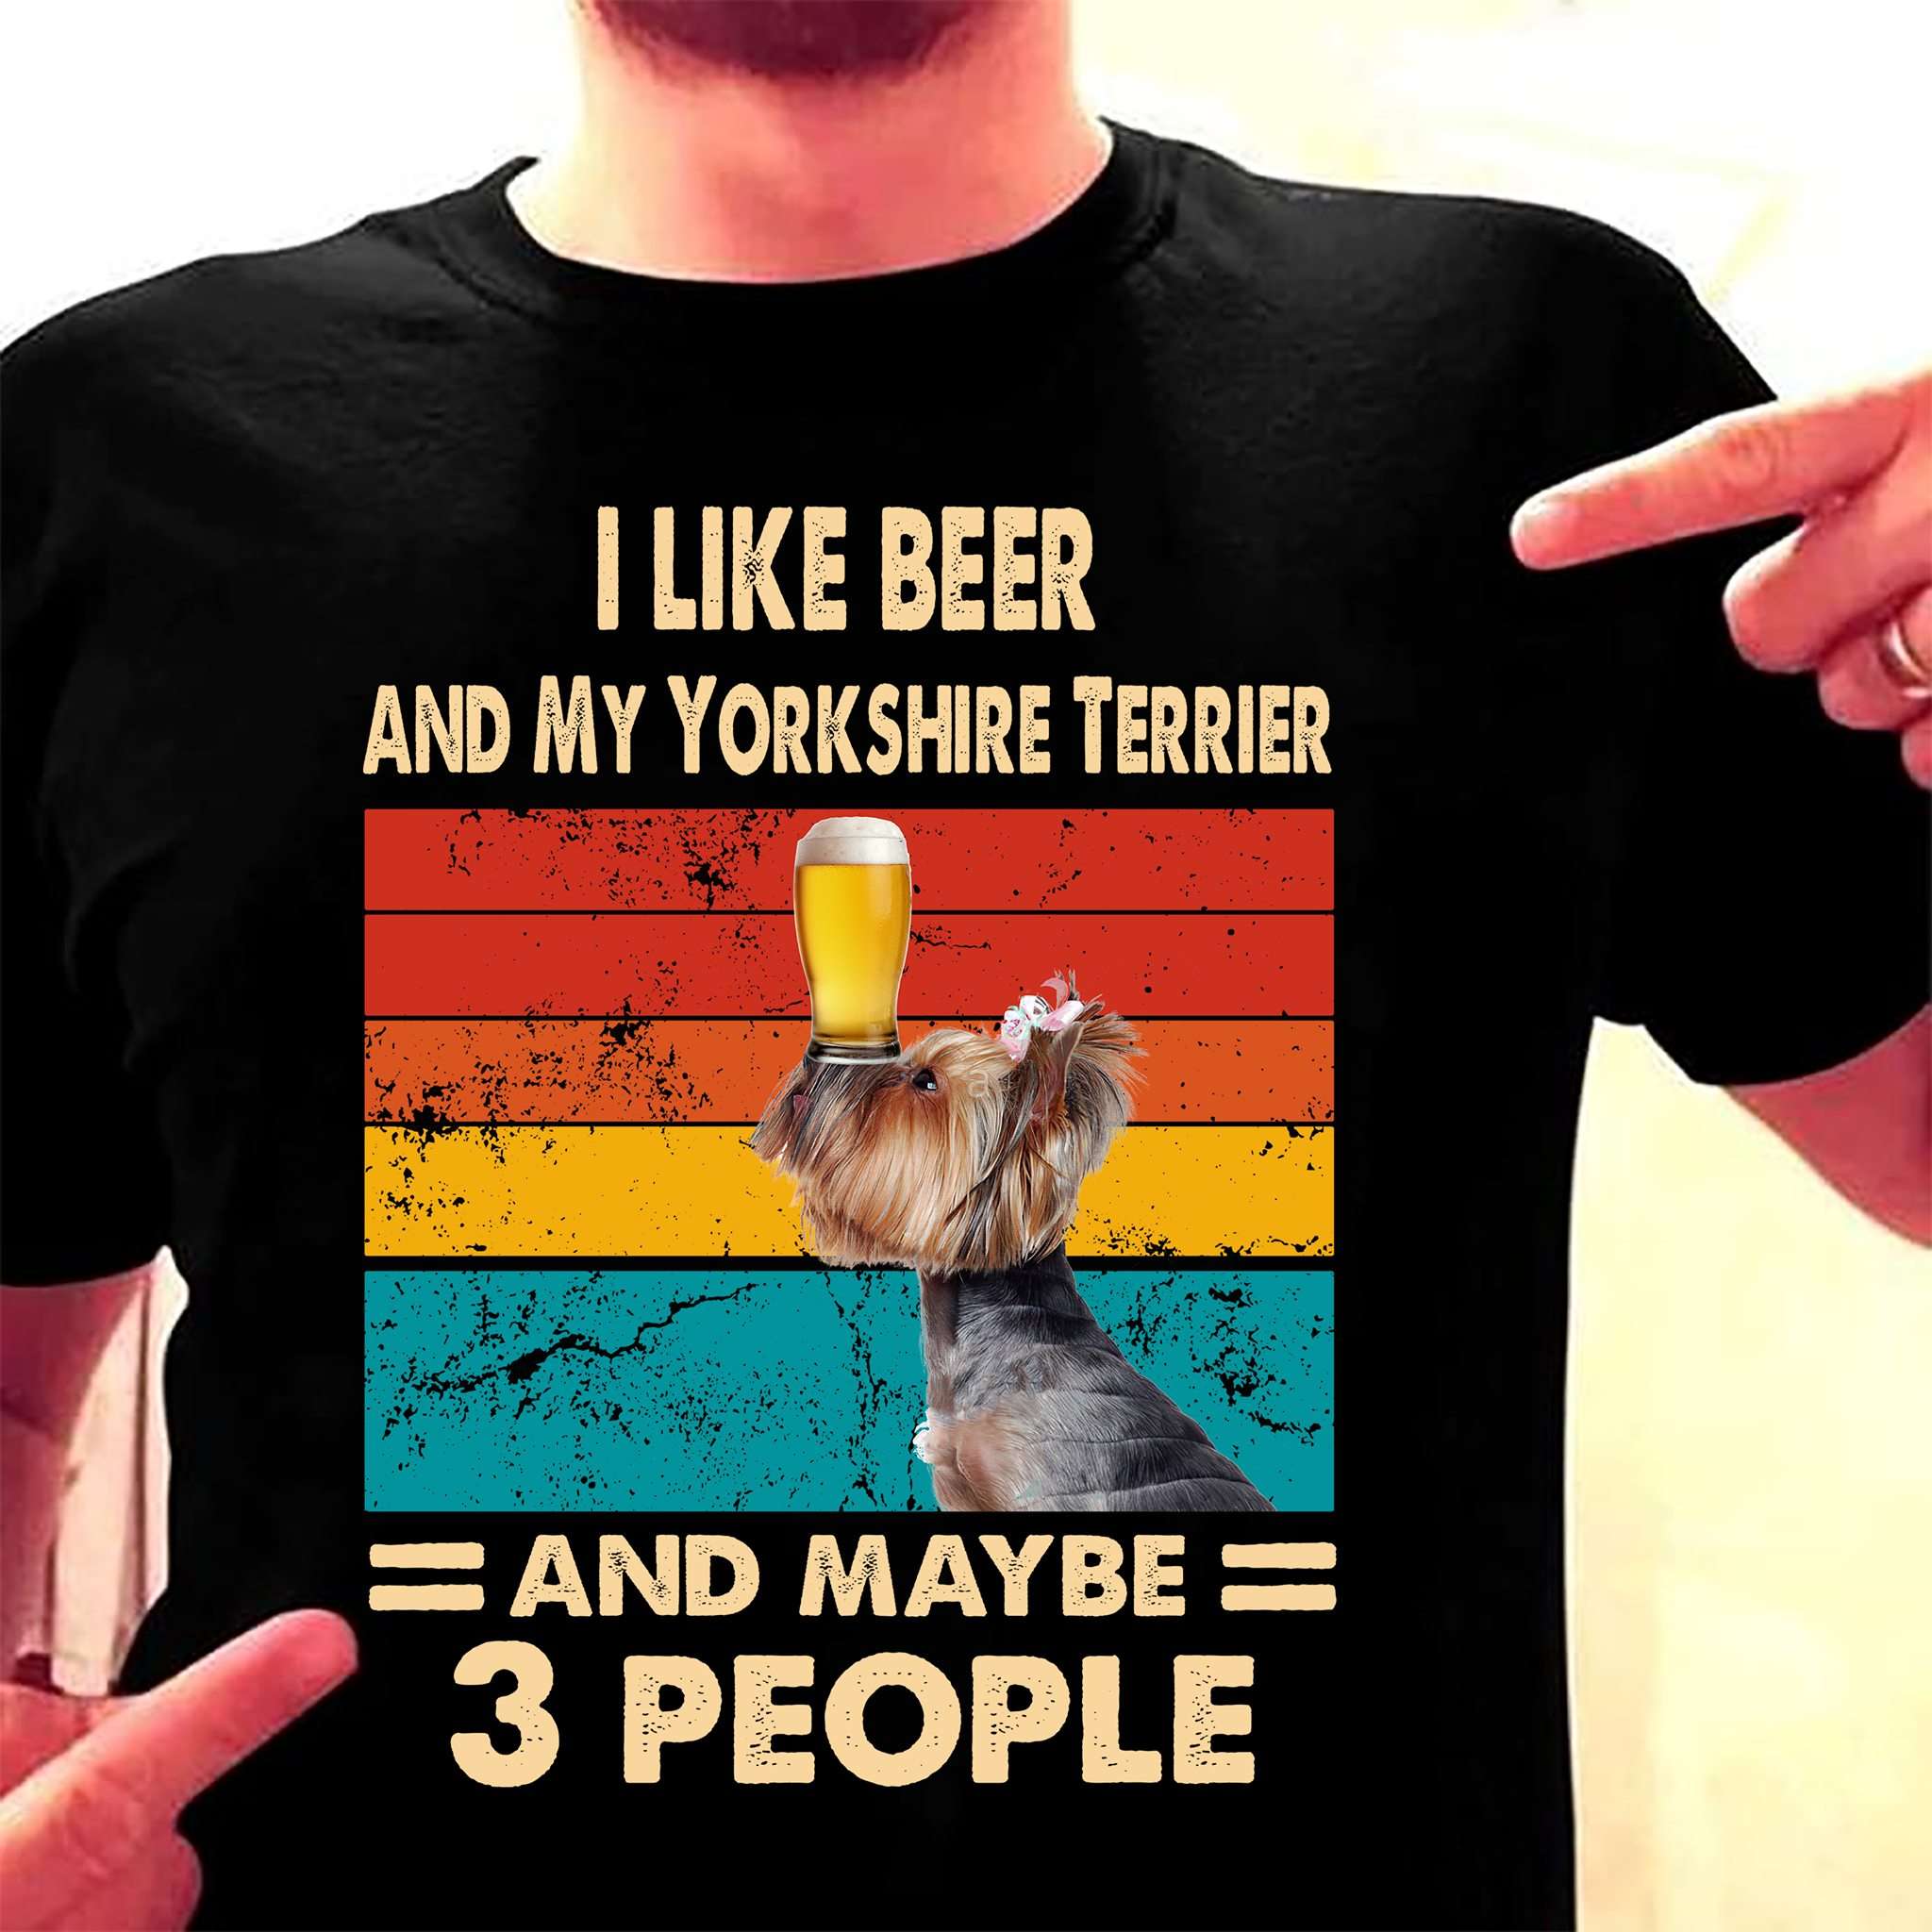 Yorshire Terrier With Beer - I like beer and my yorkshire terrier and maybe 3 people